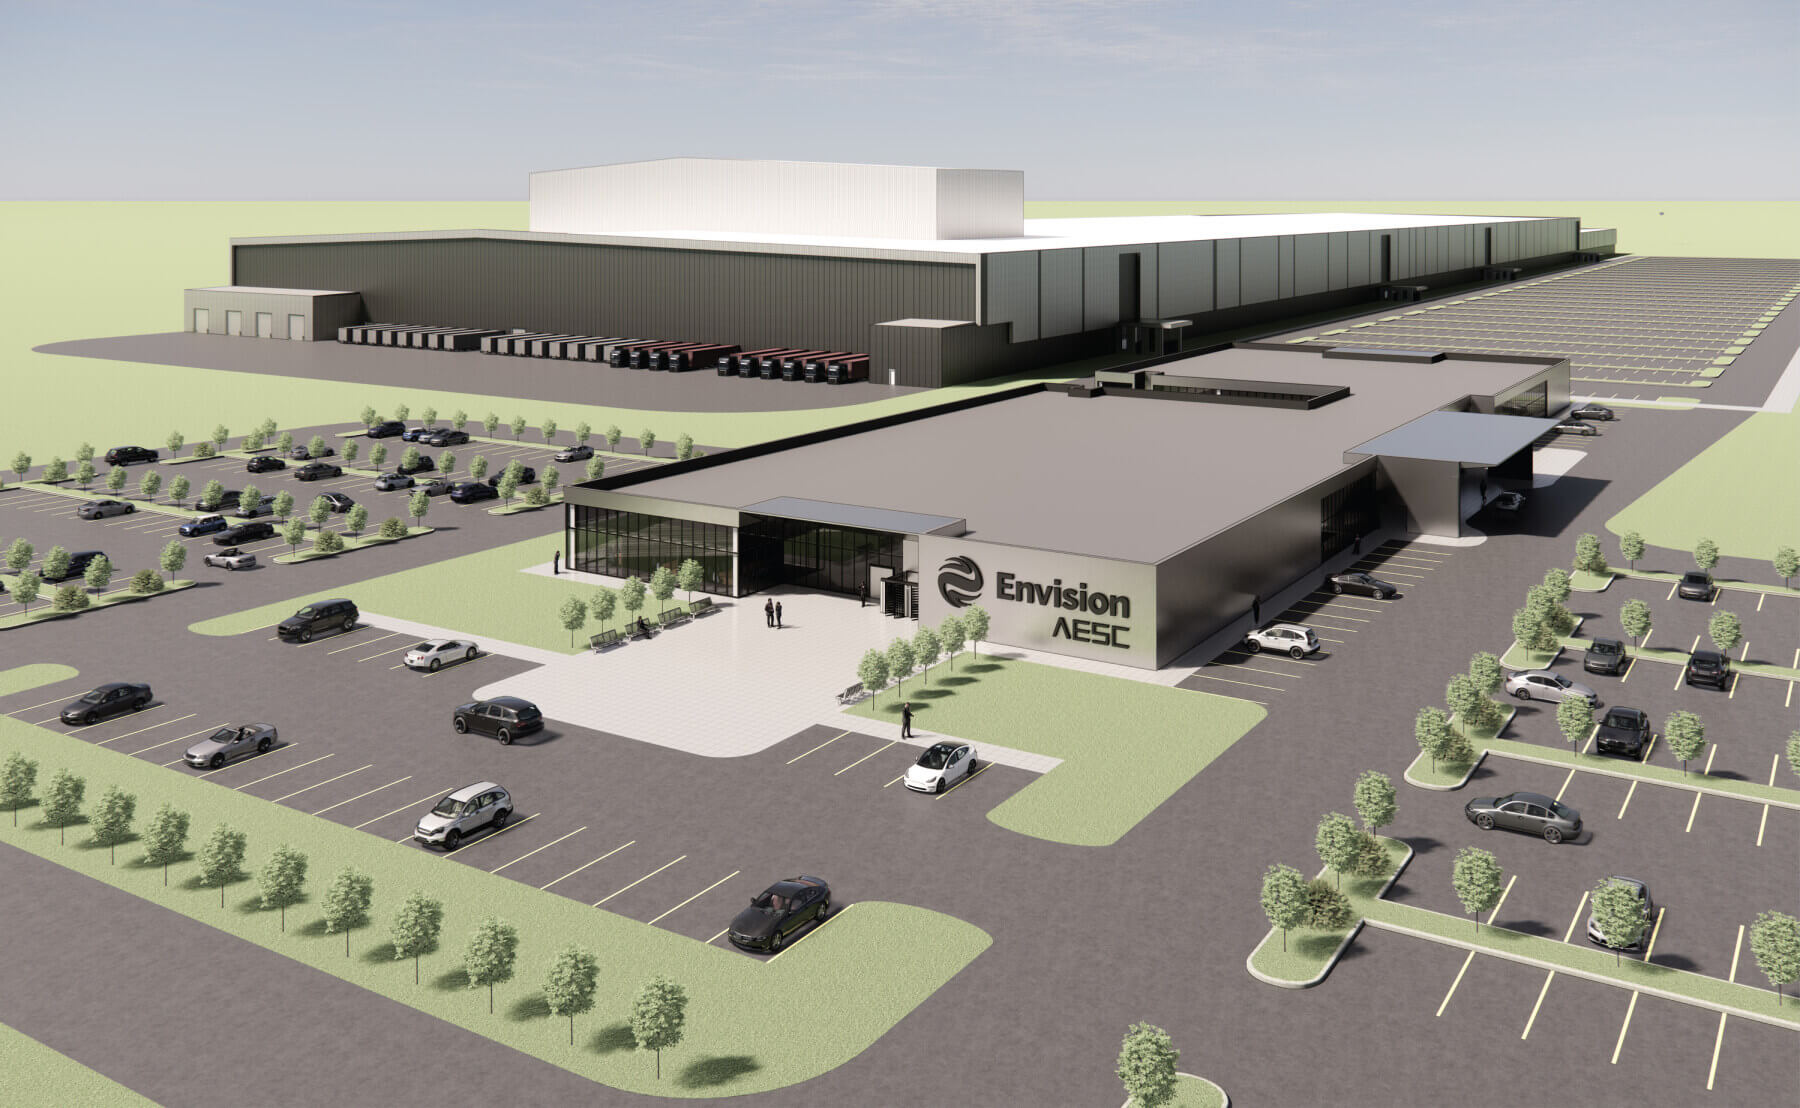 a rendering of the Envision AESC electric vehicle battery plant